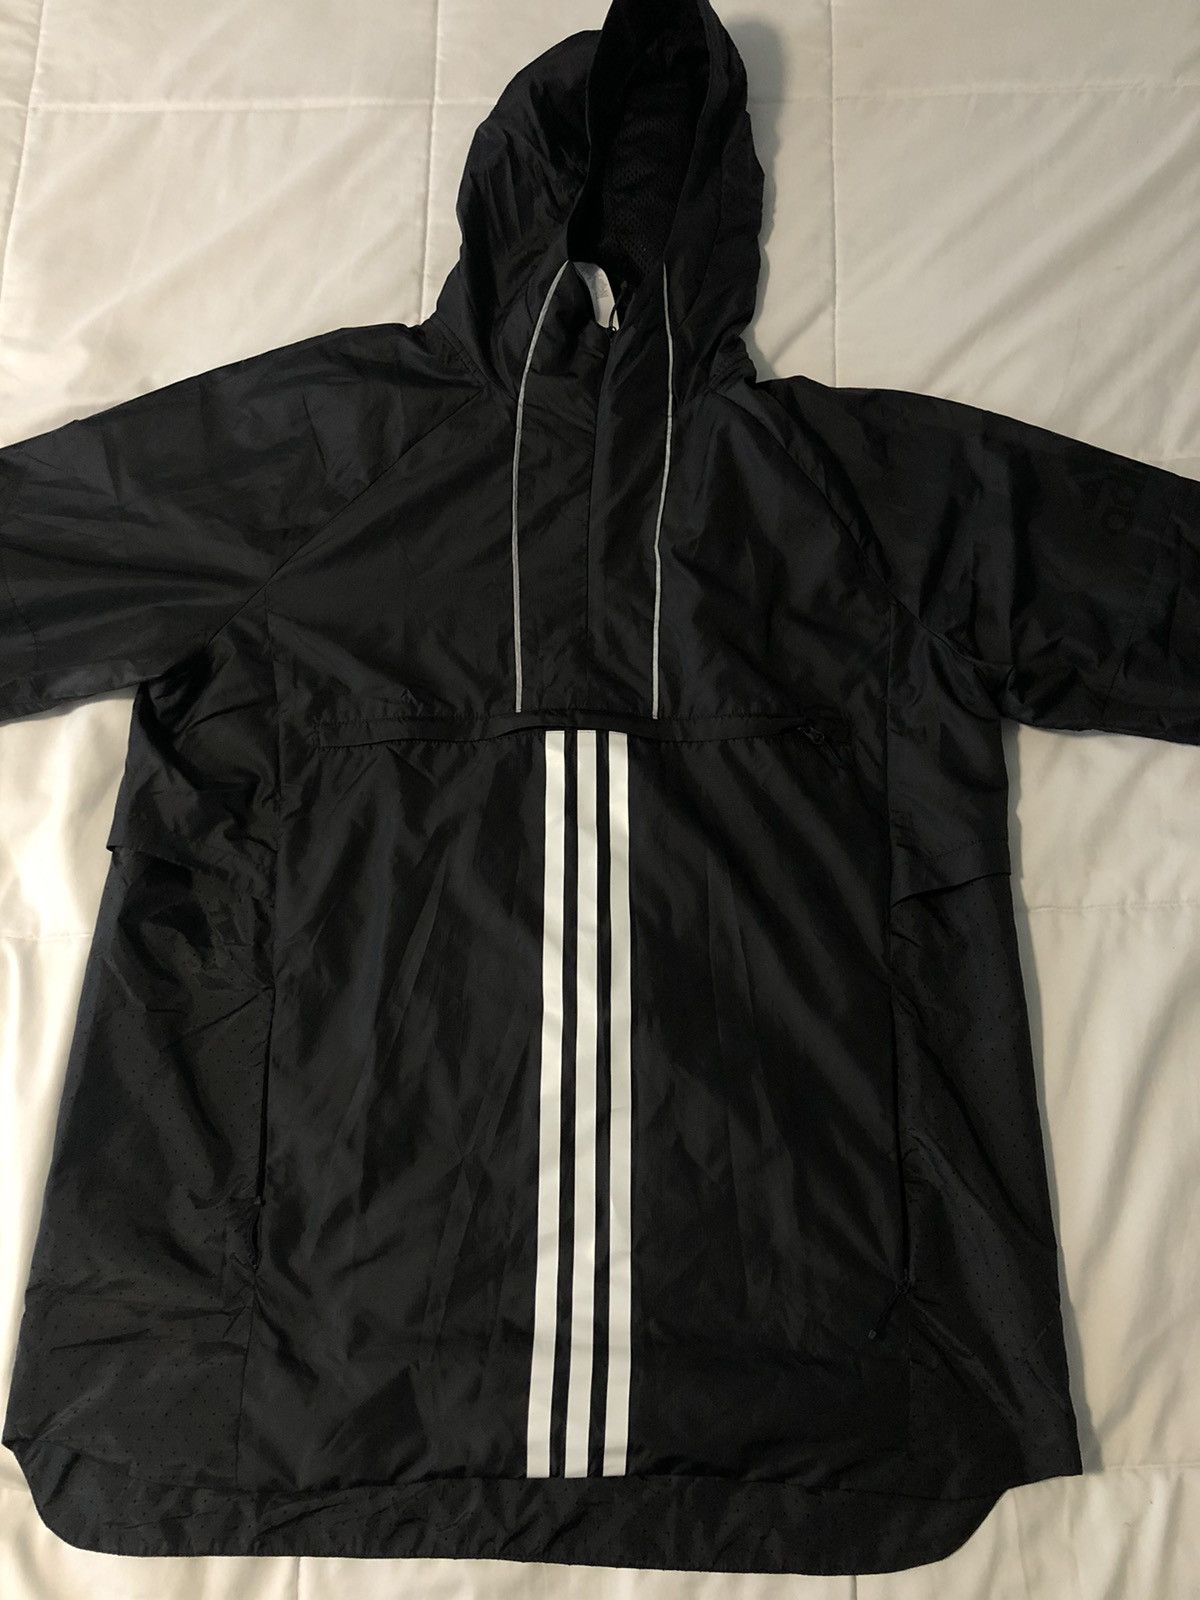 Adidas Adidas woven shell jacket Size US L / EU 52-54 / 3 - 1 Preview